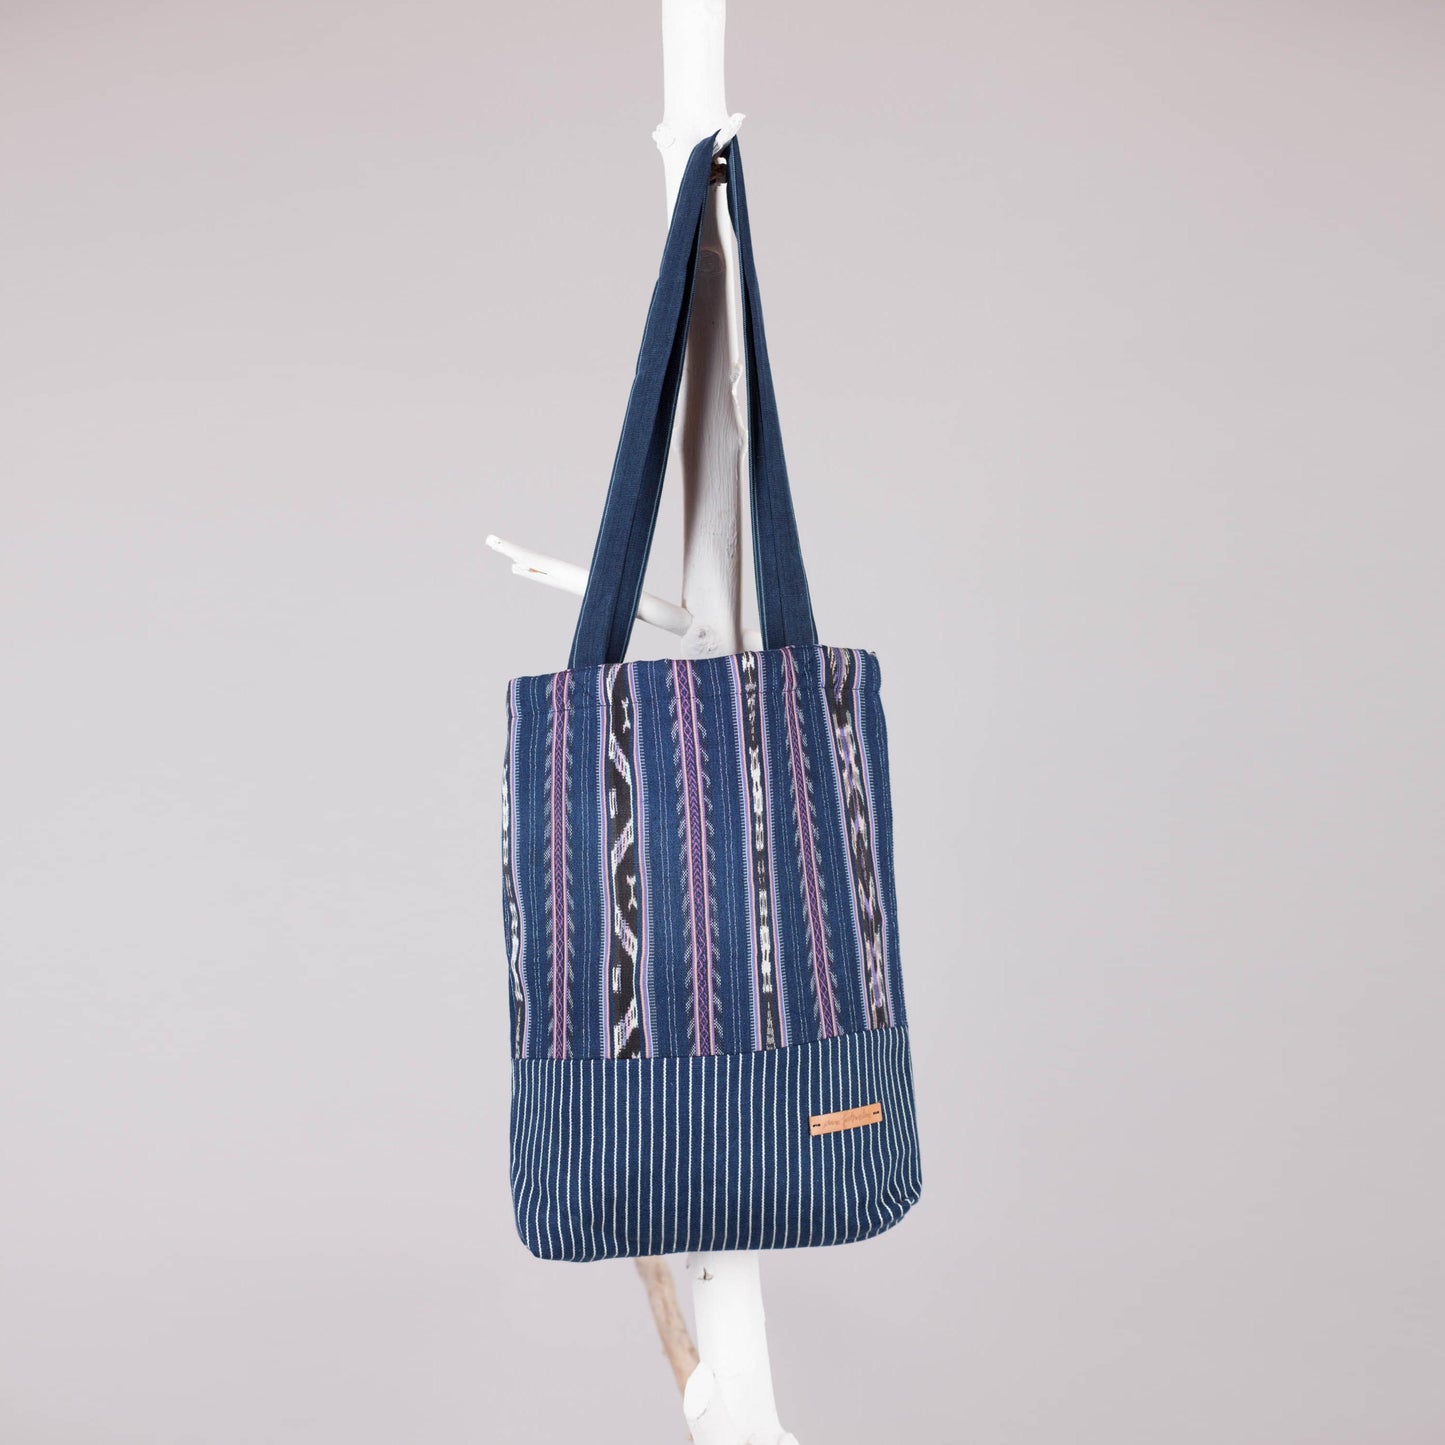 Stable hand-woven bag with inner pocket No.01, UNIKAT, lined, canvas, cotton, jute bag, fabric bag